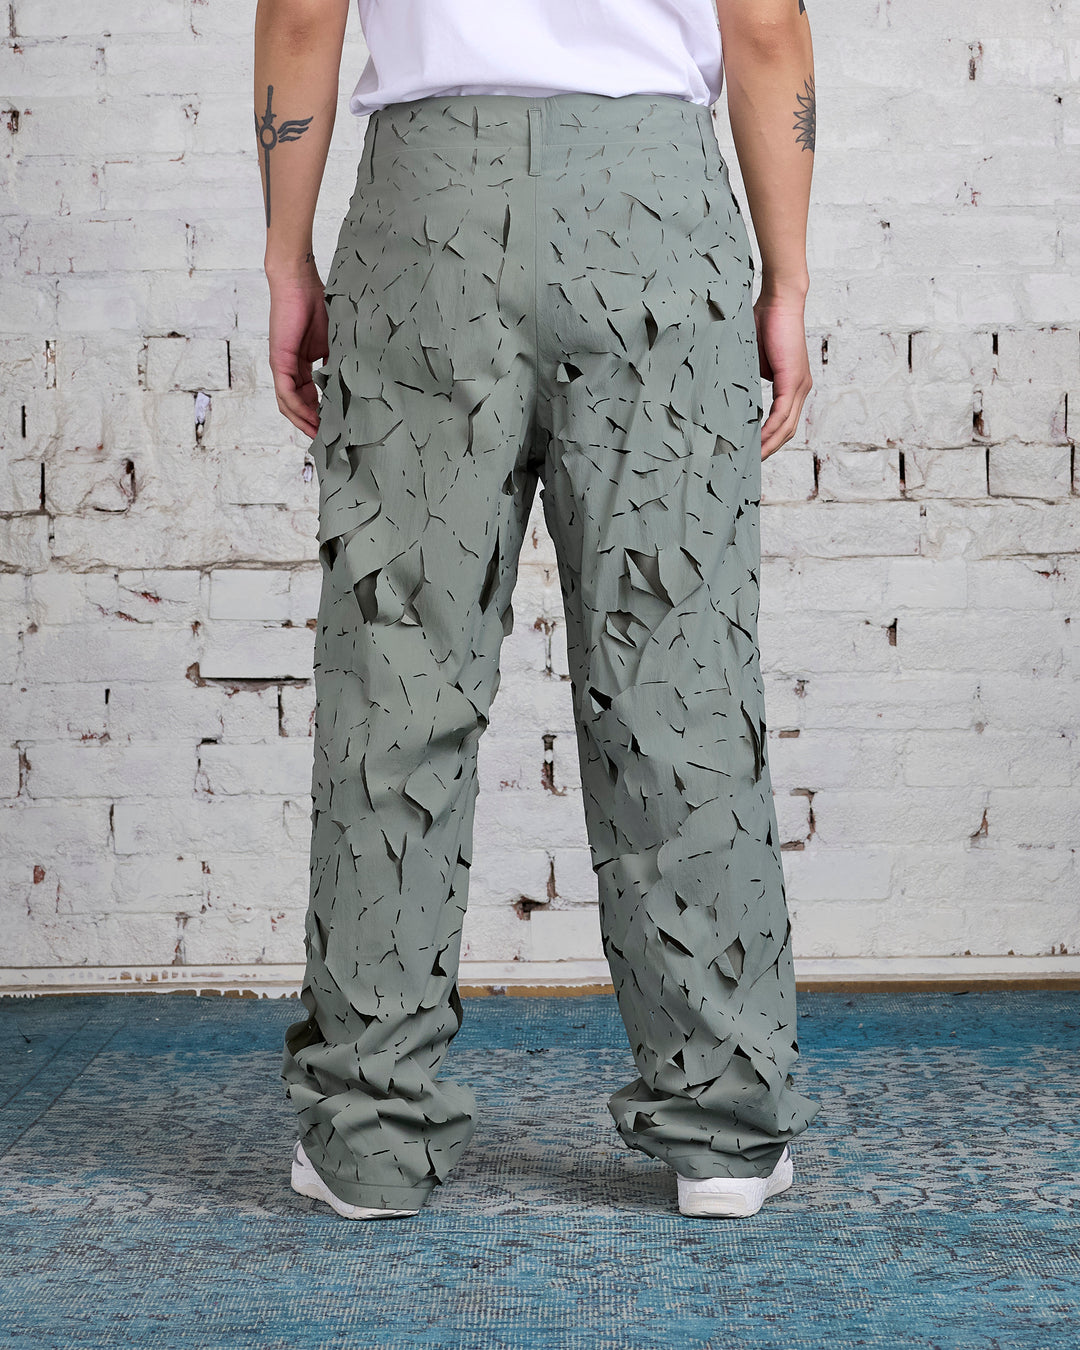 Post Achive Faction 6.0 Trousers Left Olive Green